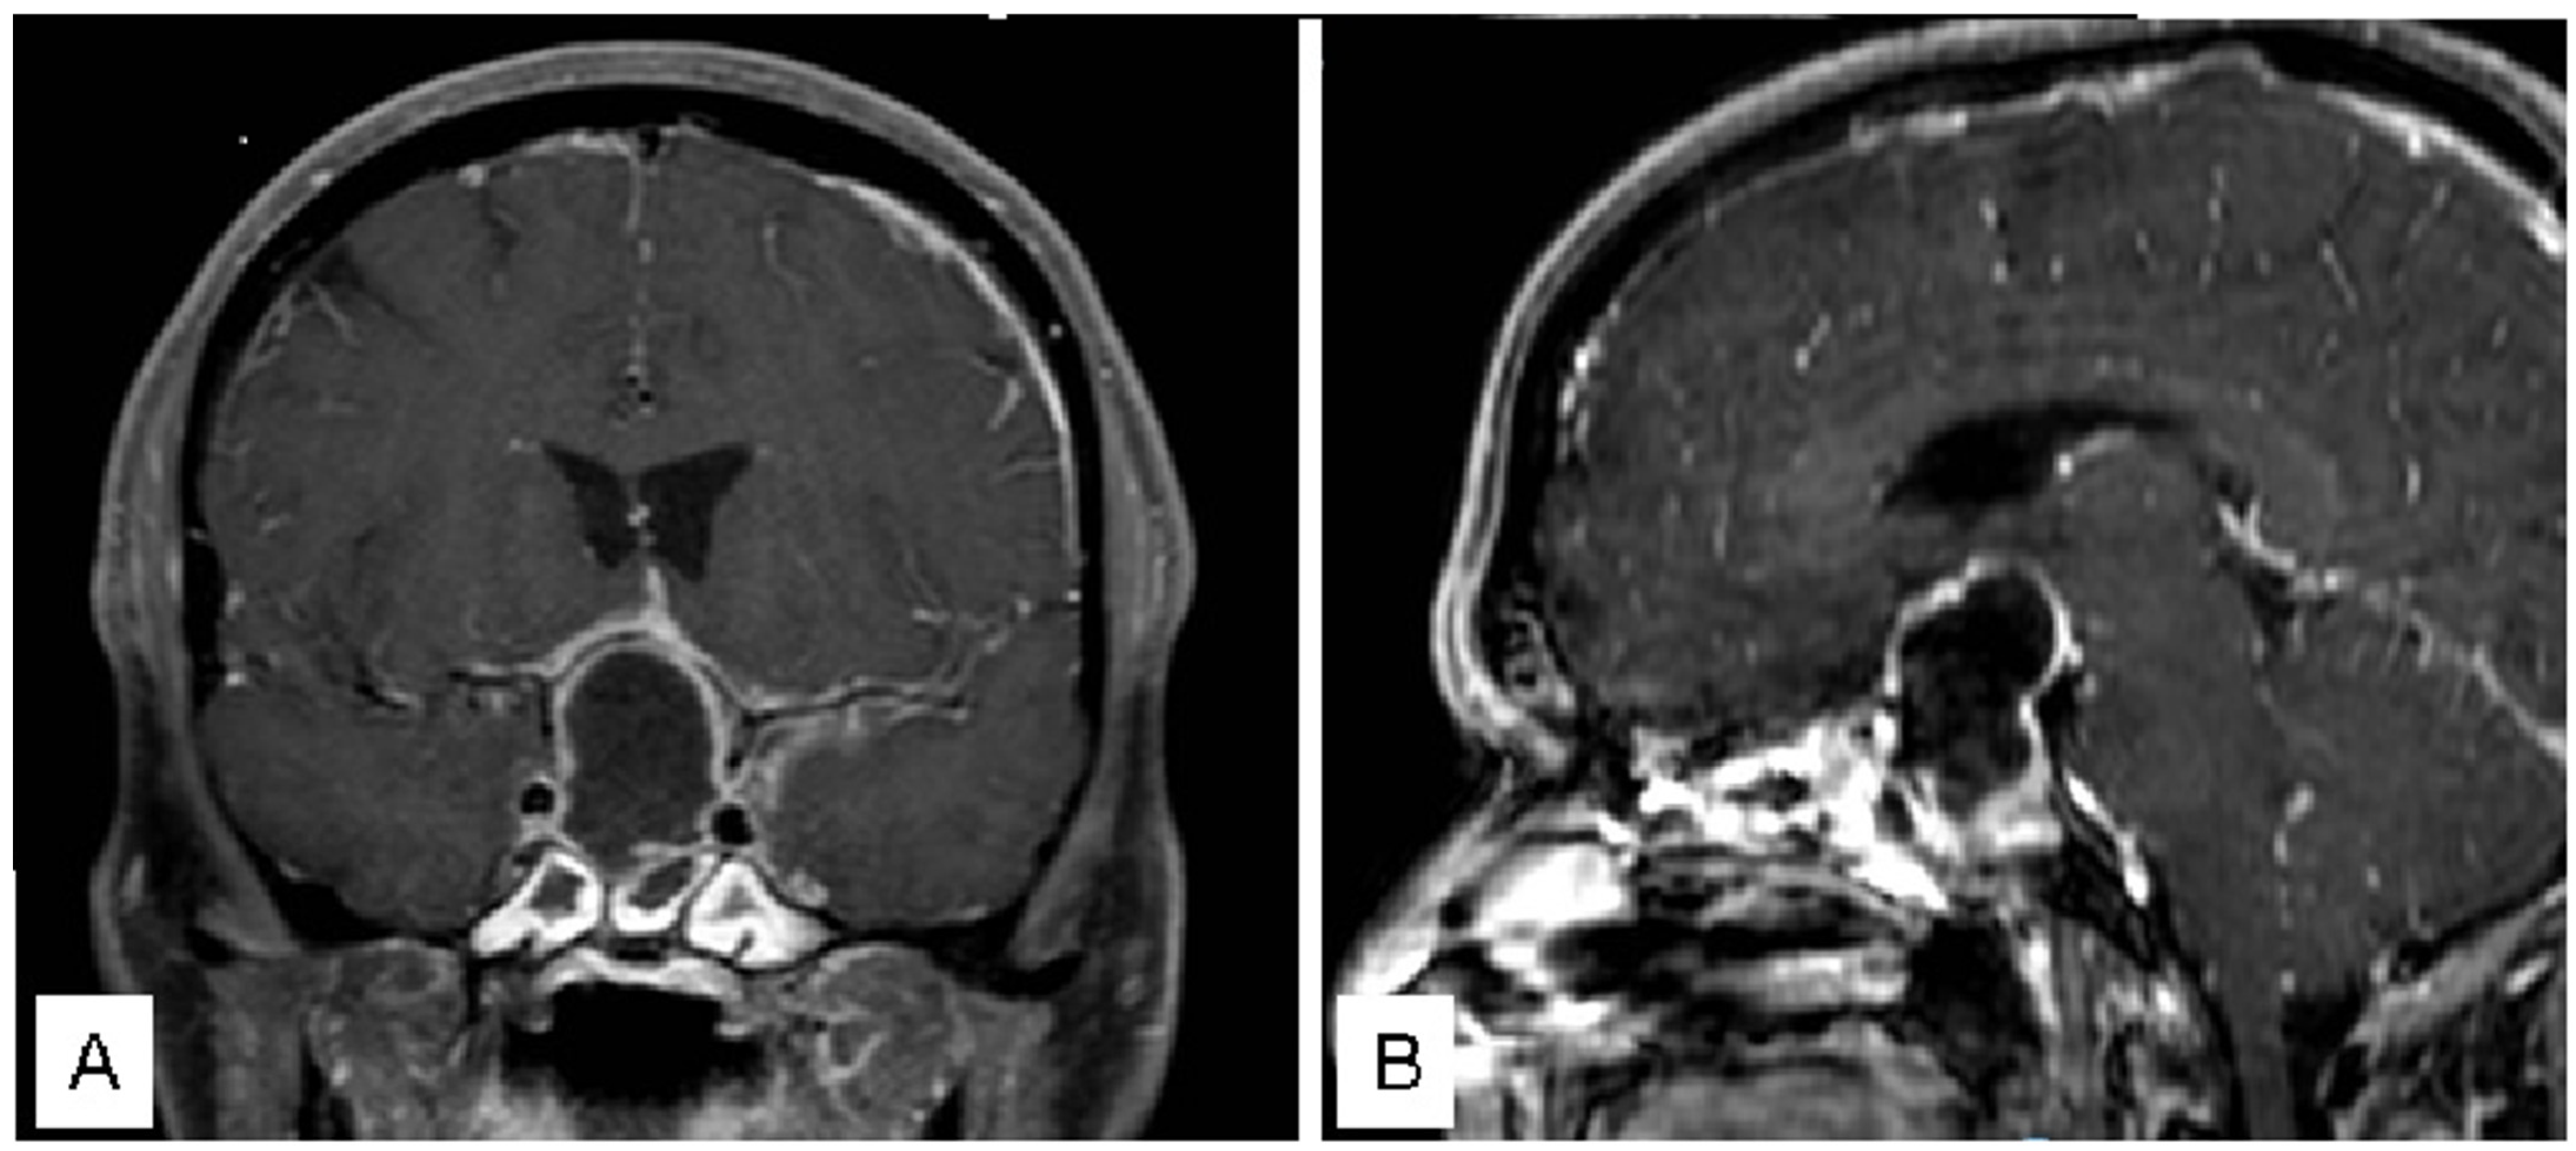 [Neuankömmling] JCM | Experience Treatment Neurosurgical Approach: Full-Text Emergencies Endoscopic of Free | Endonasal with Centers Three Referral from Italian Ultra-Early